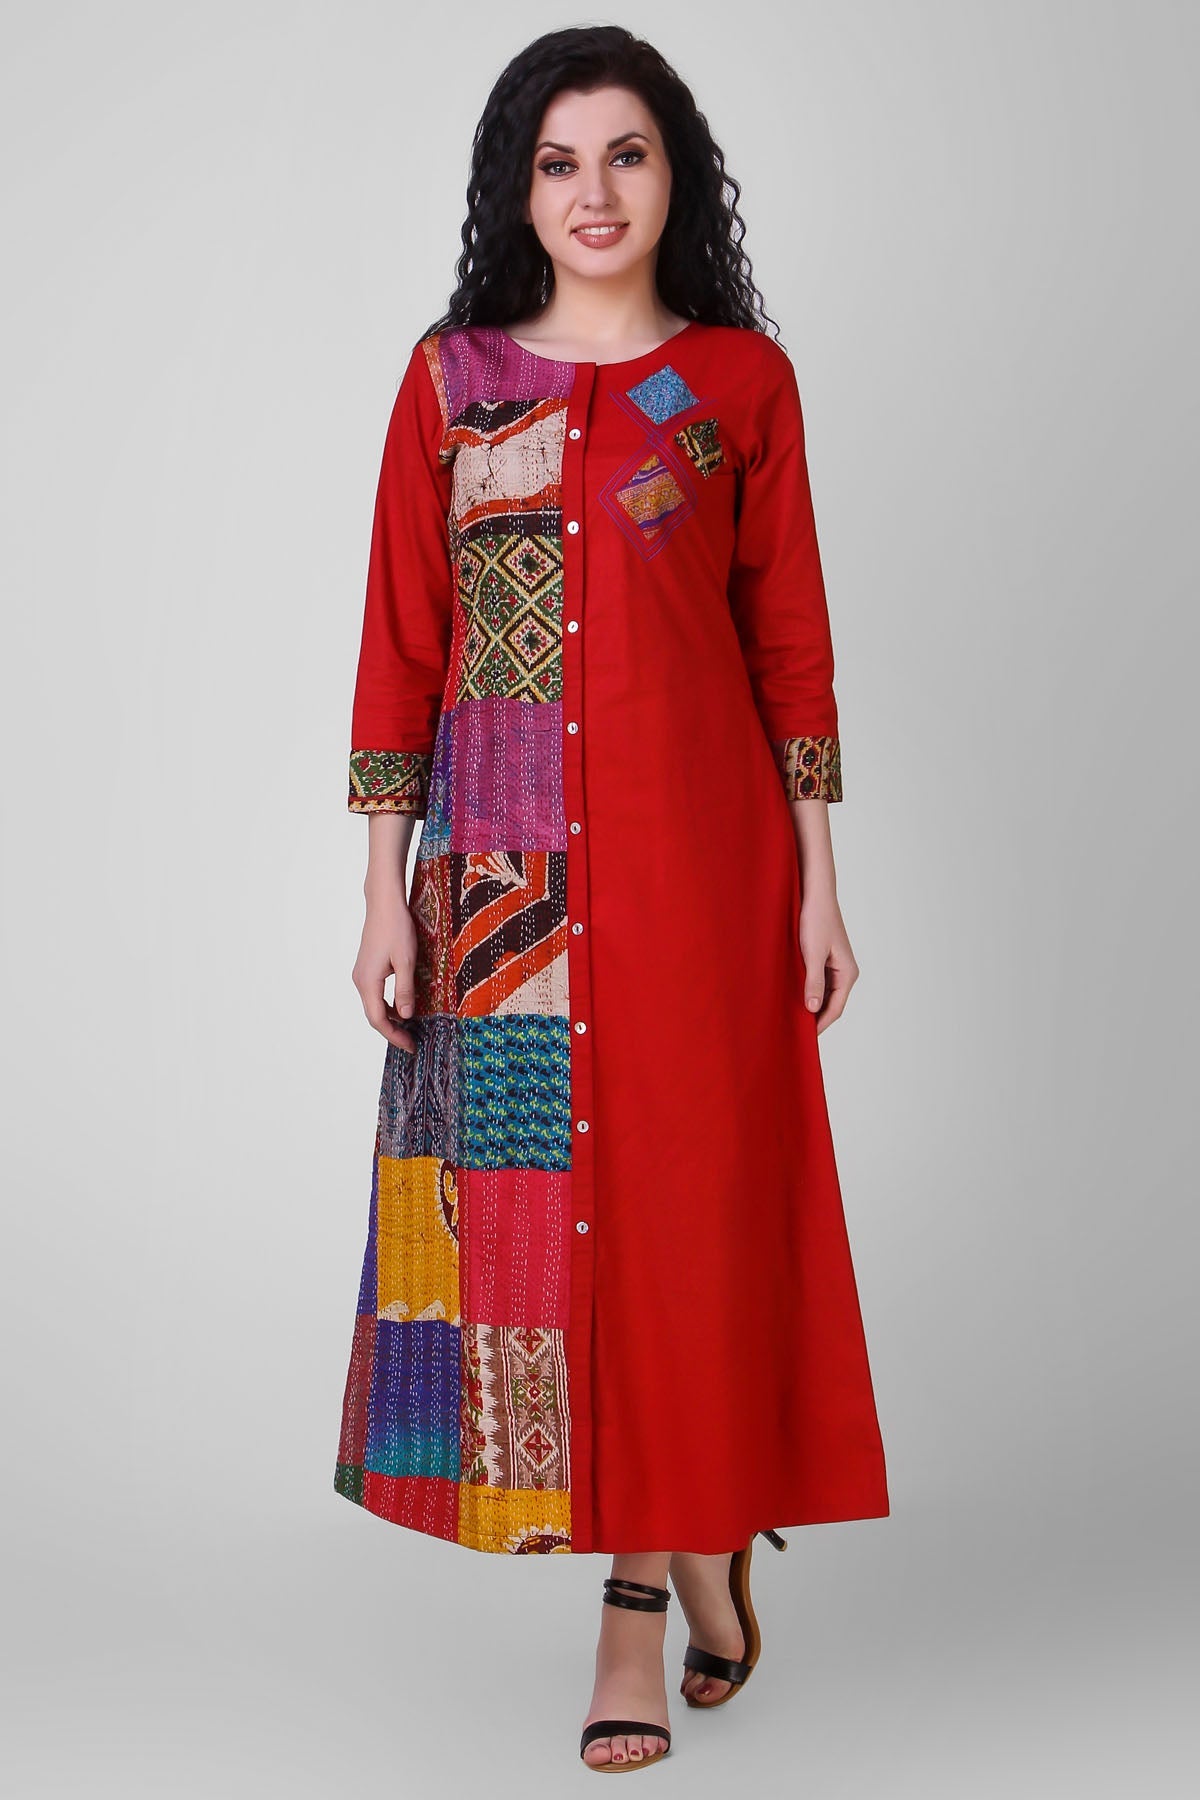 Buy Simply Kitsch Red Dress for Women online available at ScrollnShops